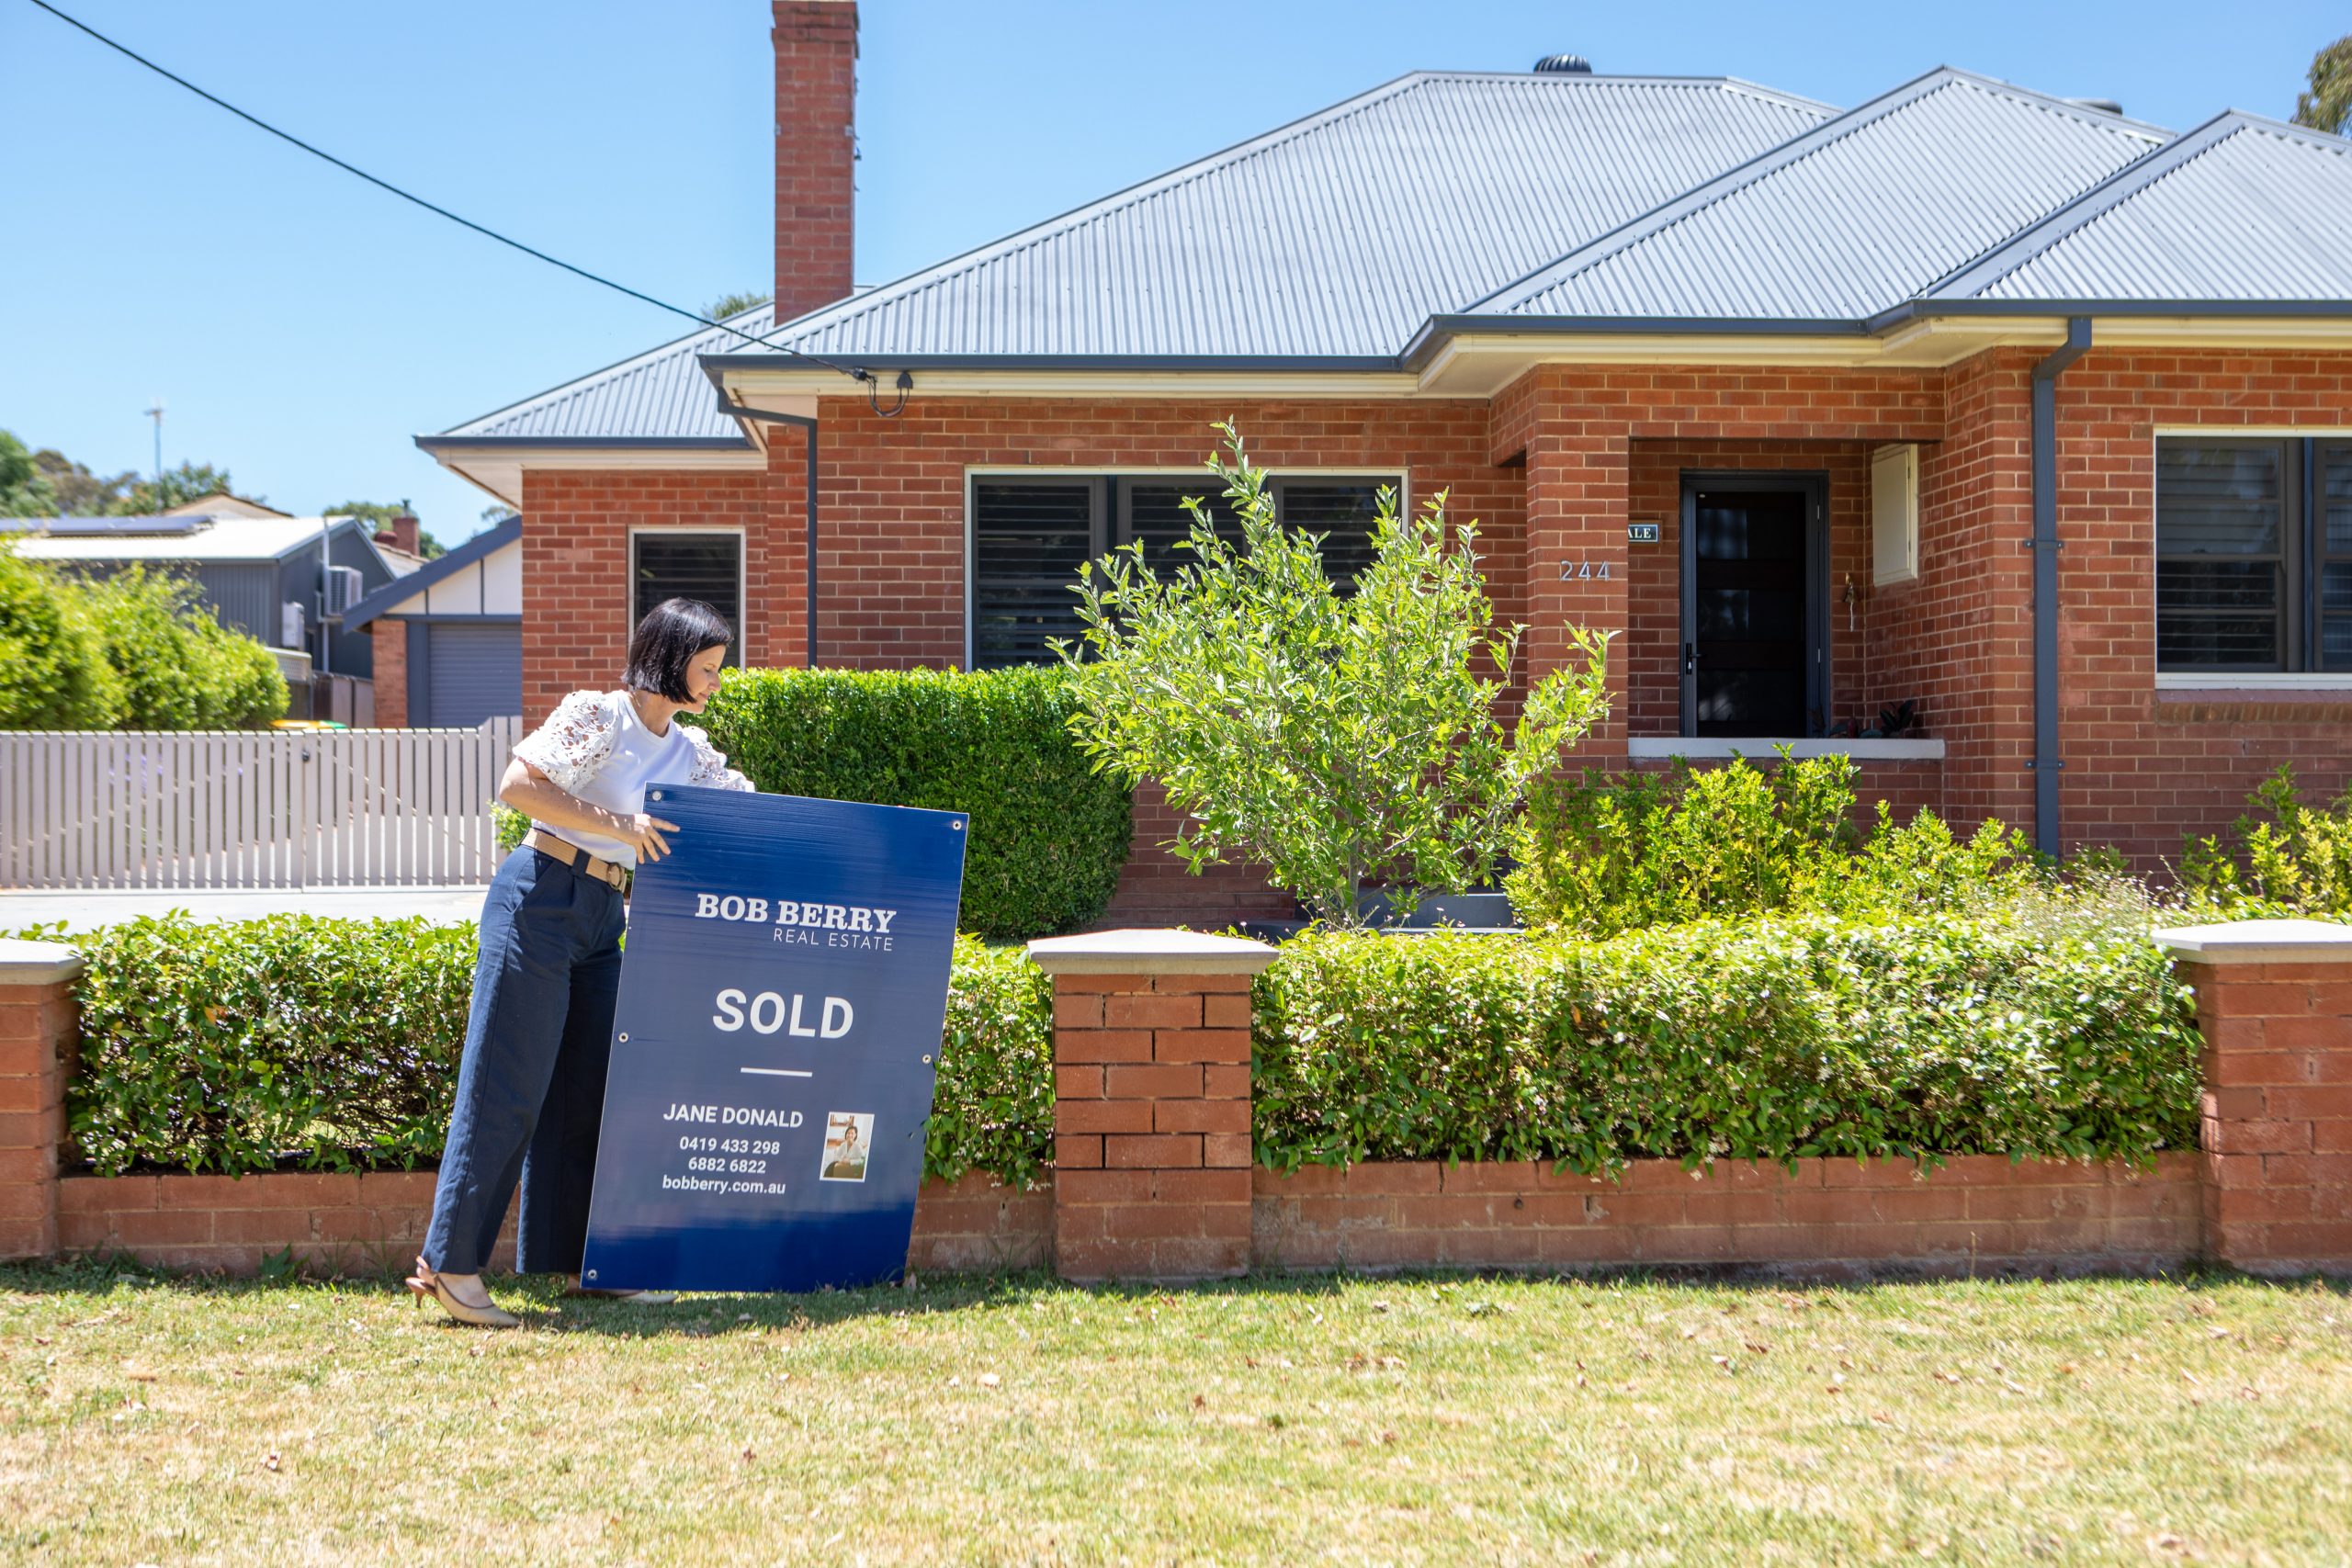 Dubbo Residential Prices Strong After Full Year Of Interest Rate Rises